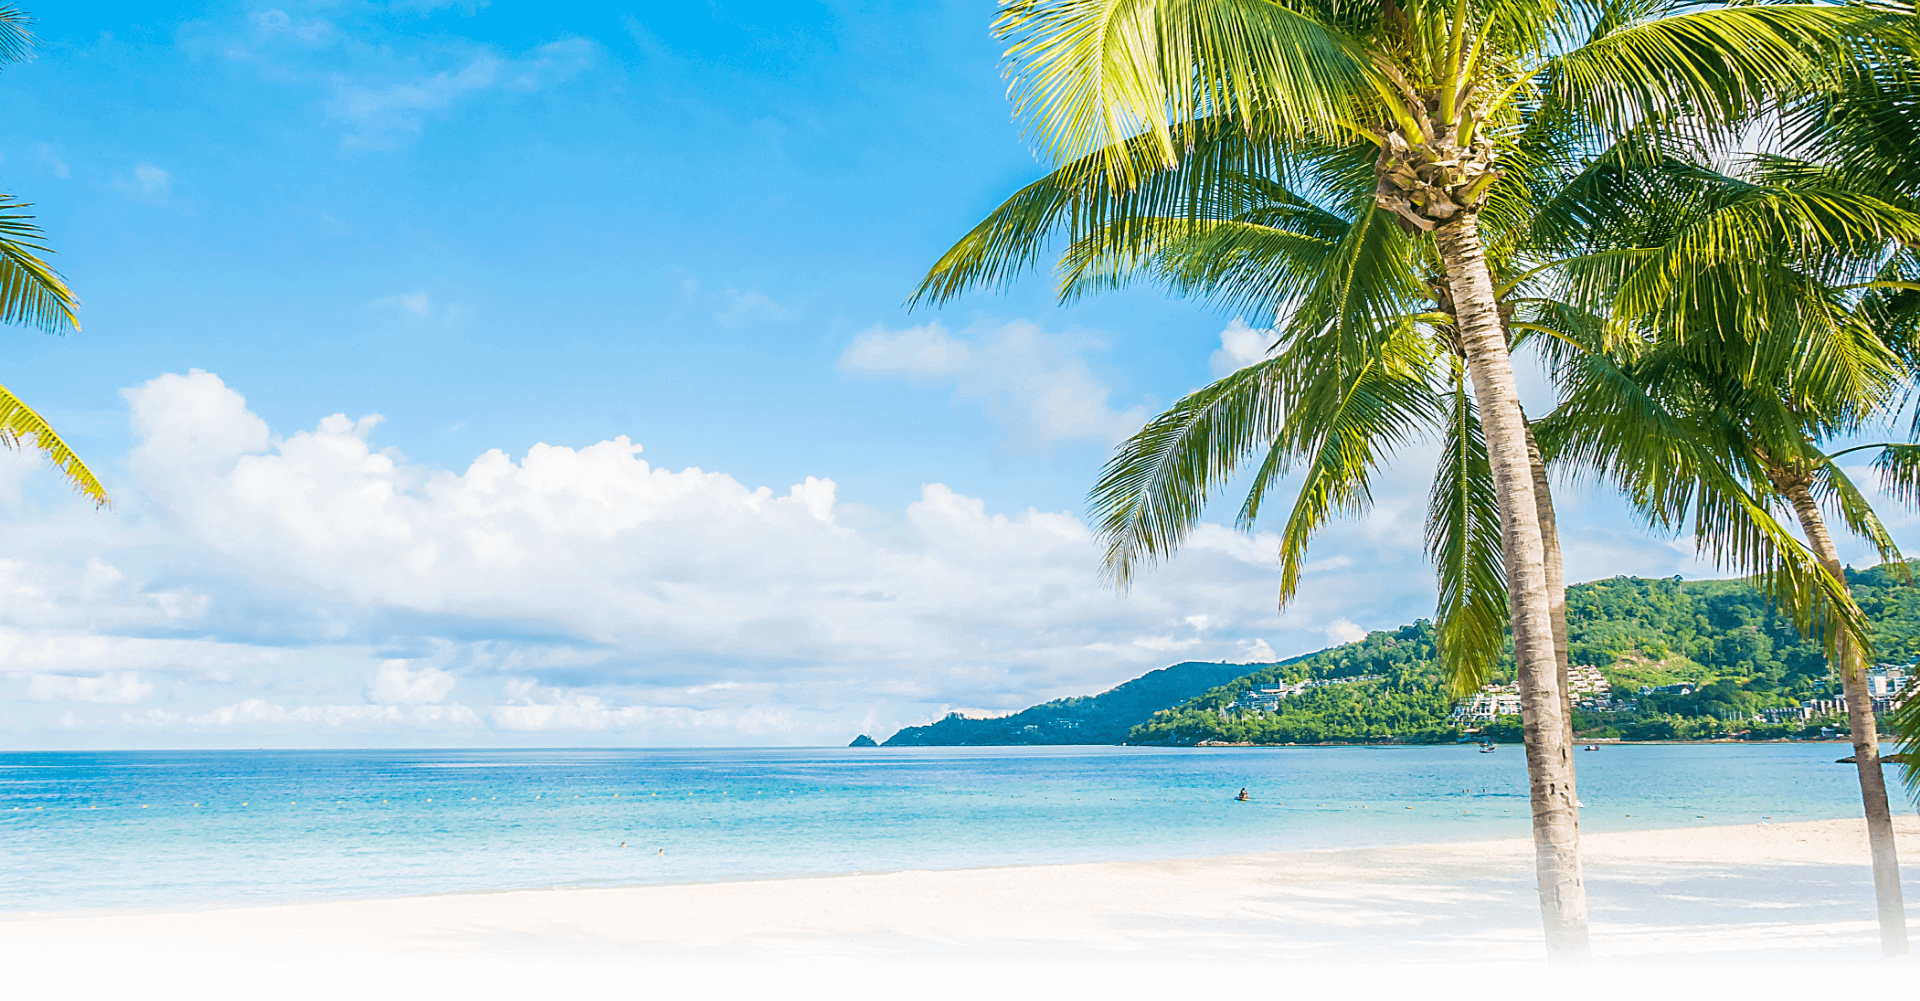 Pristine beach with palm tree, white sand, and cerulean seawater on a bright, sunny day. 